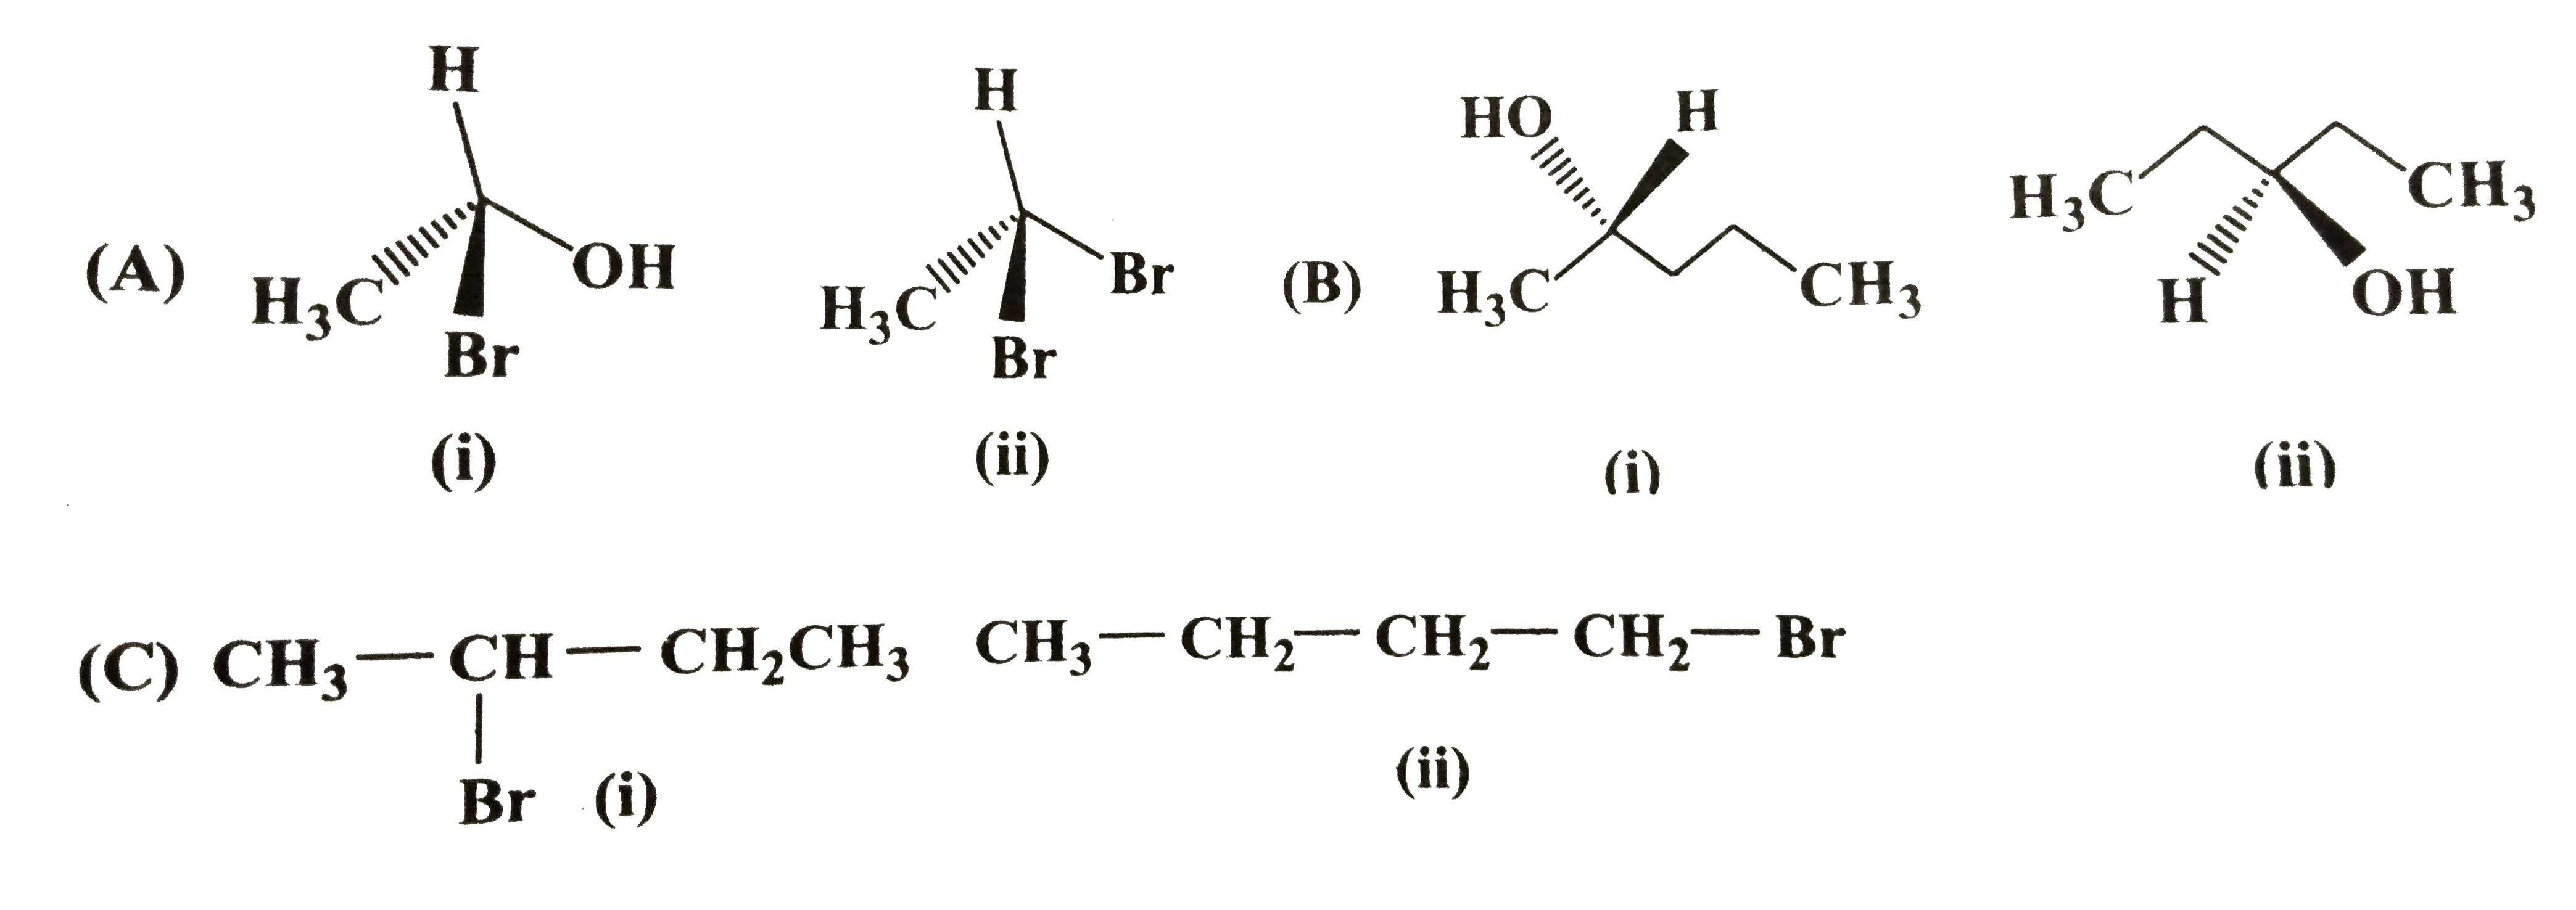 Identify chiral and achiral molecules in each of the following pairs compounds.